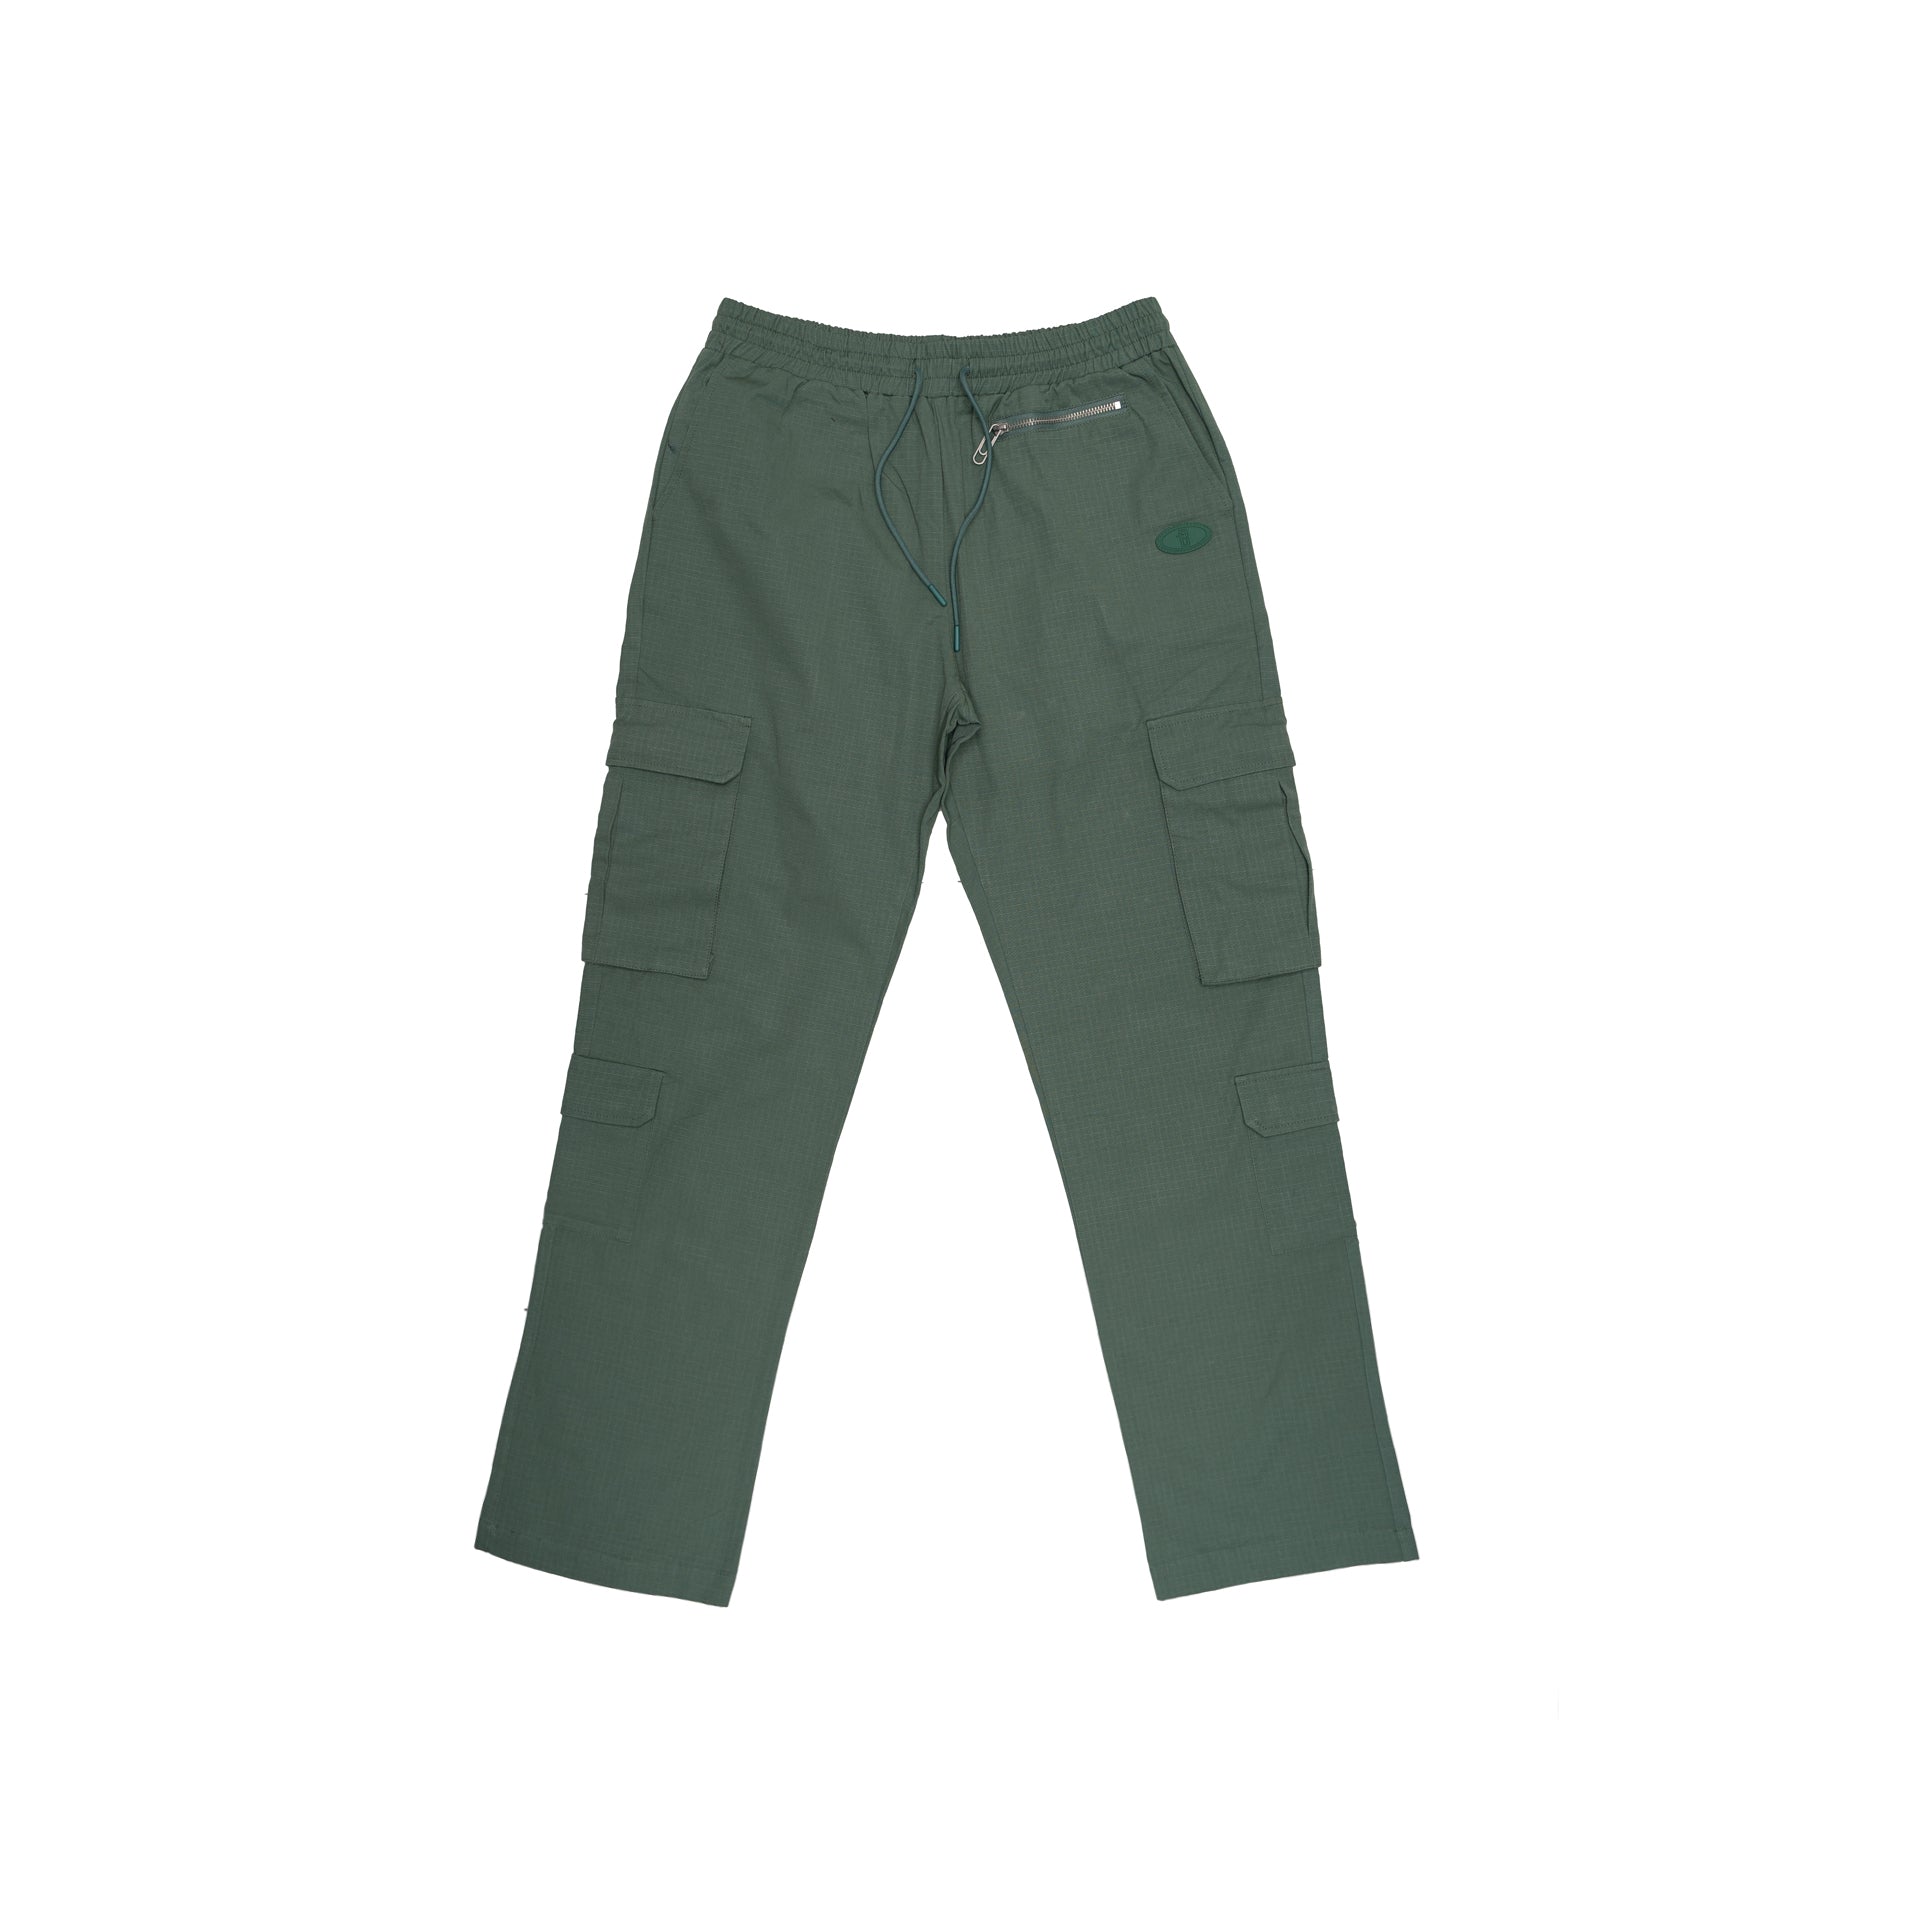 Green Cargo Pants by Brandtionary